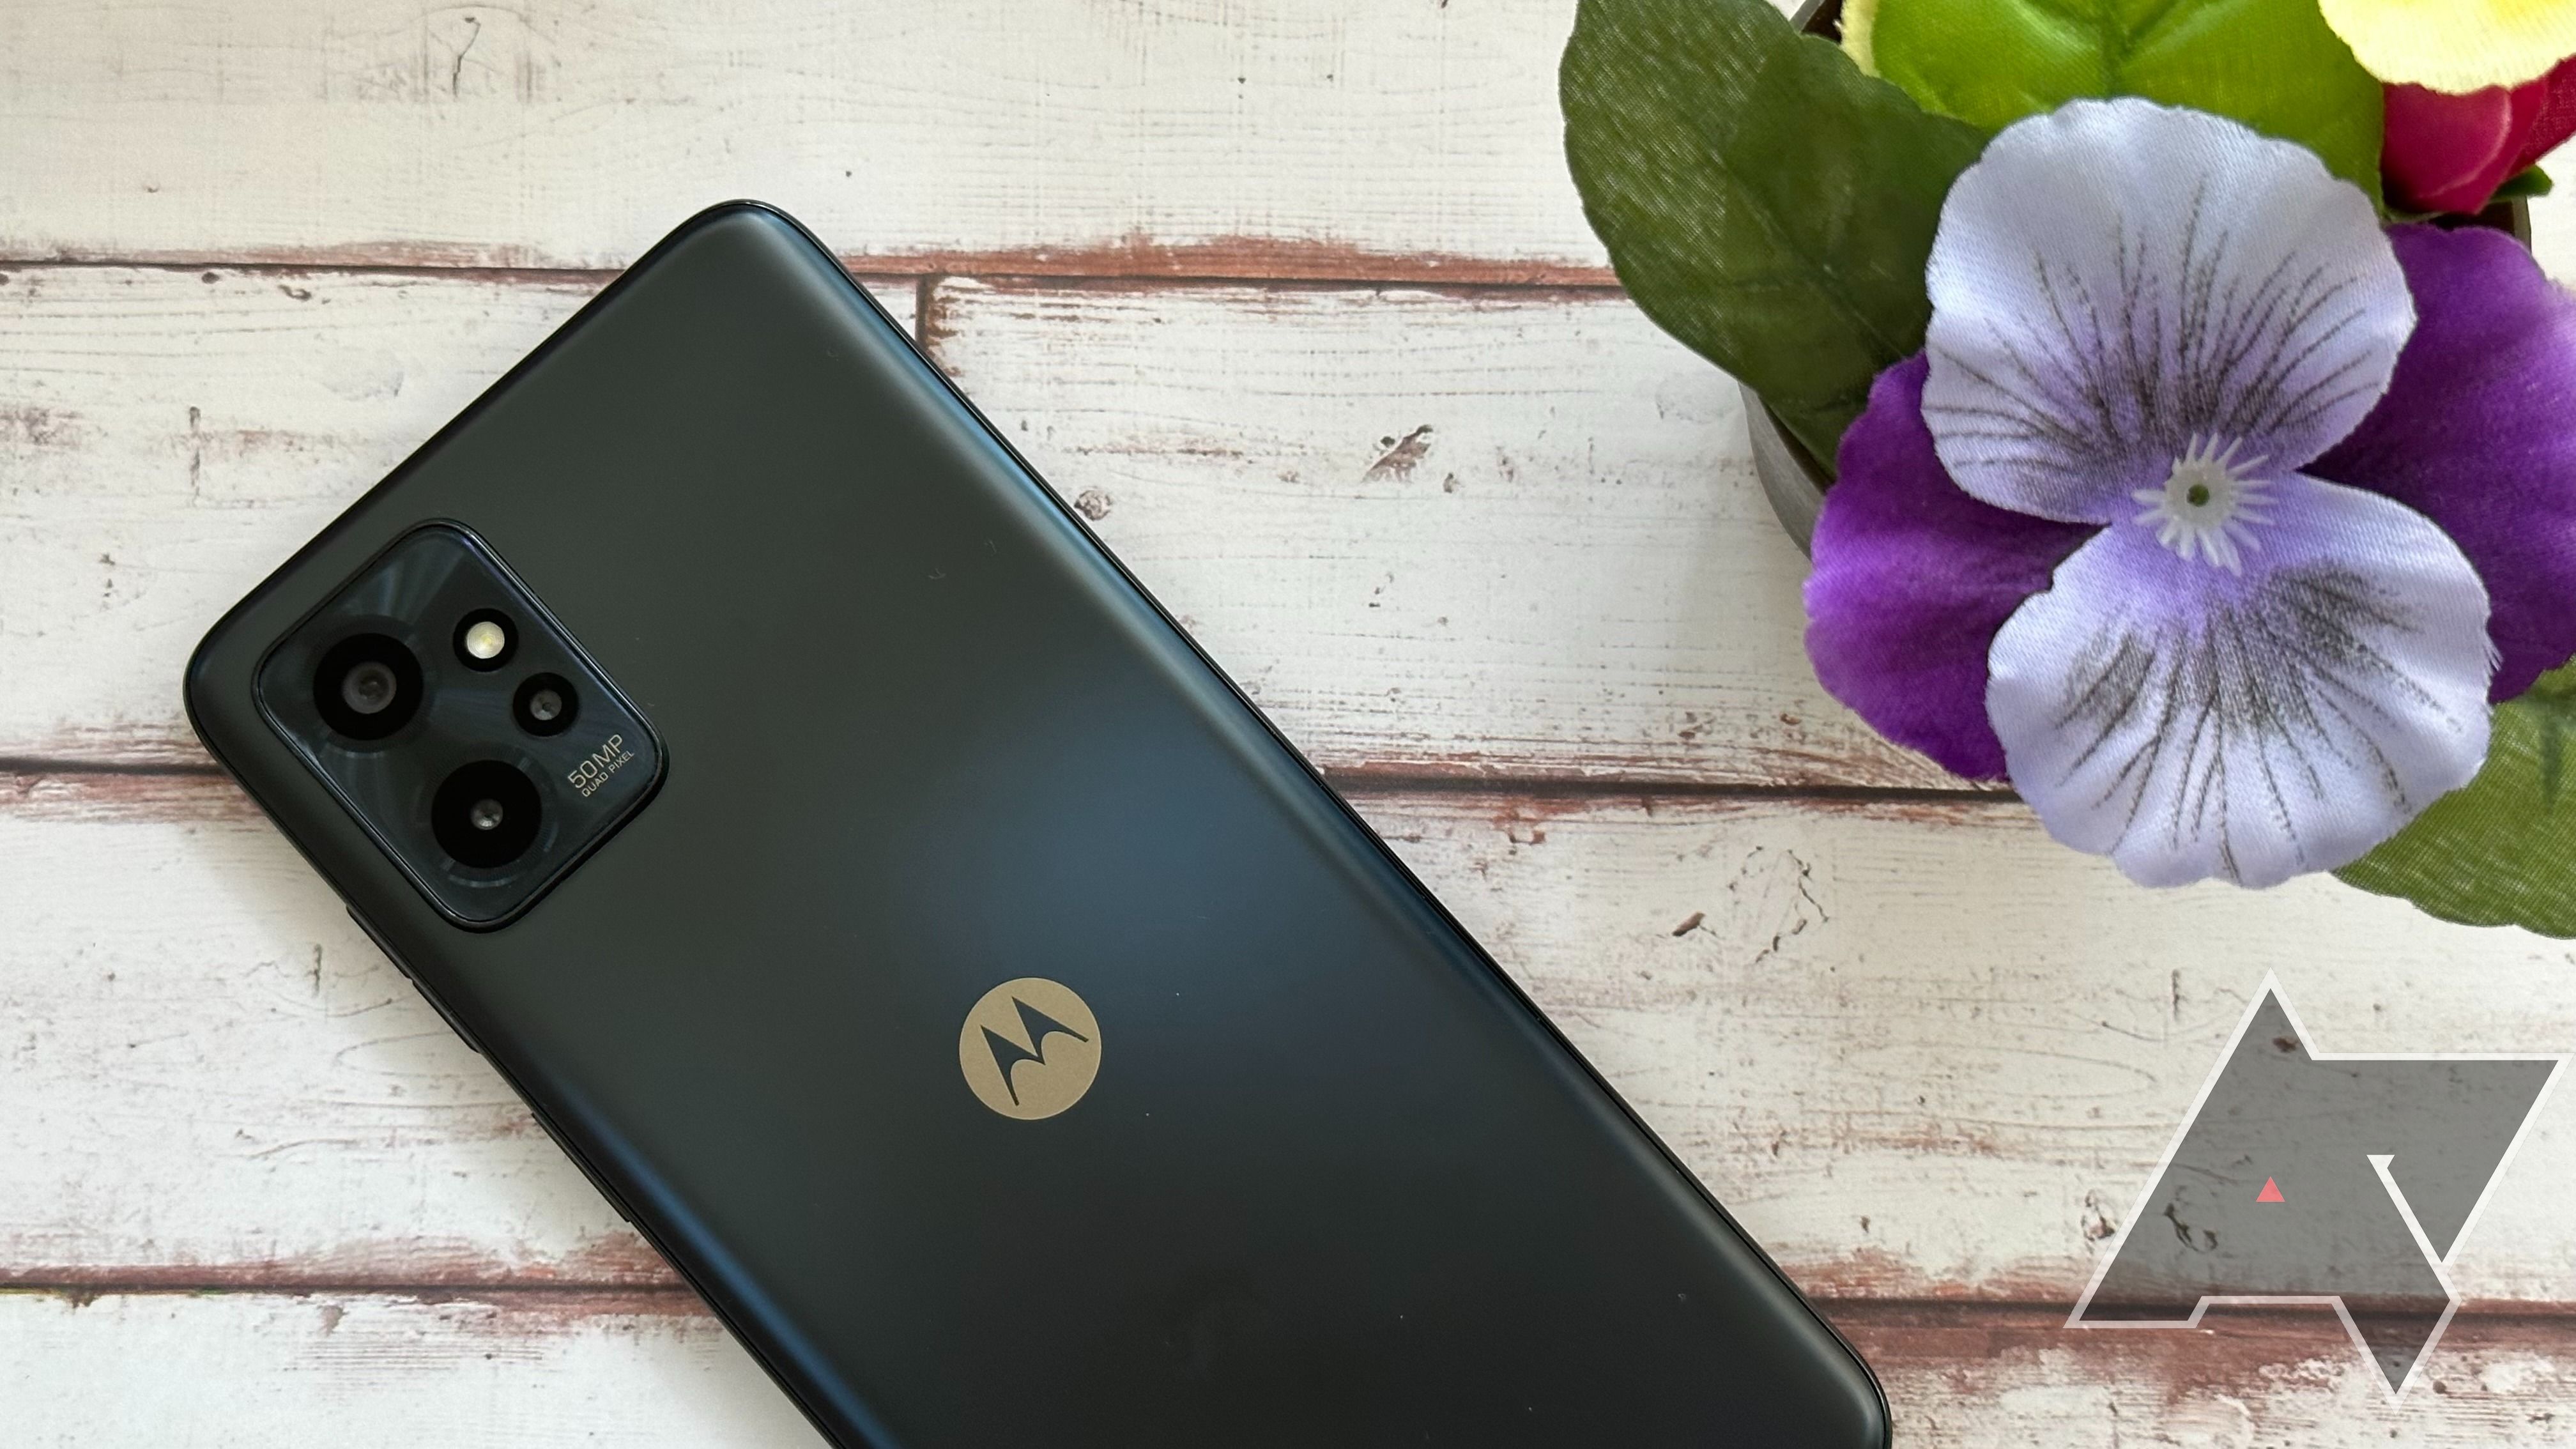 The Moto G Power 5G resting on a wooden table face down next to flowers